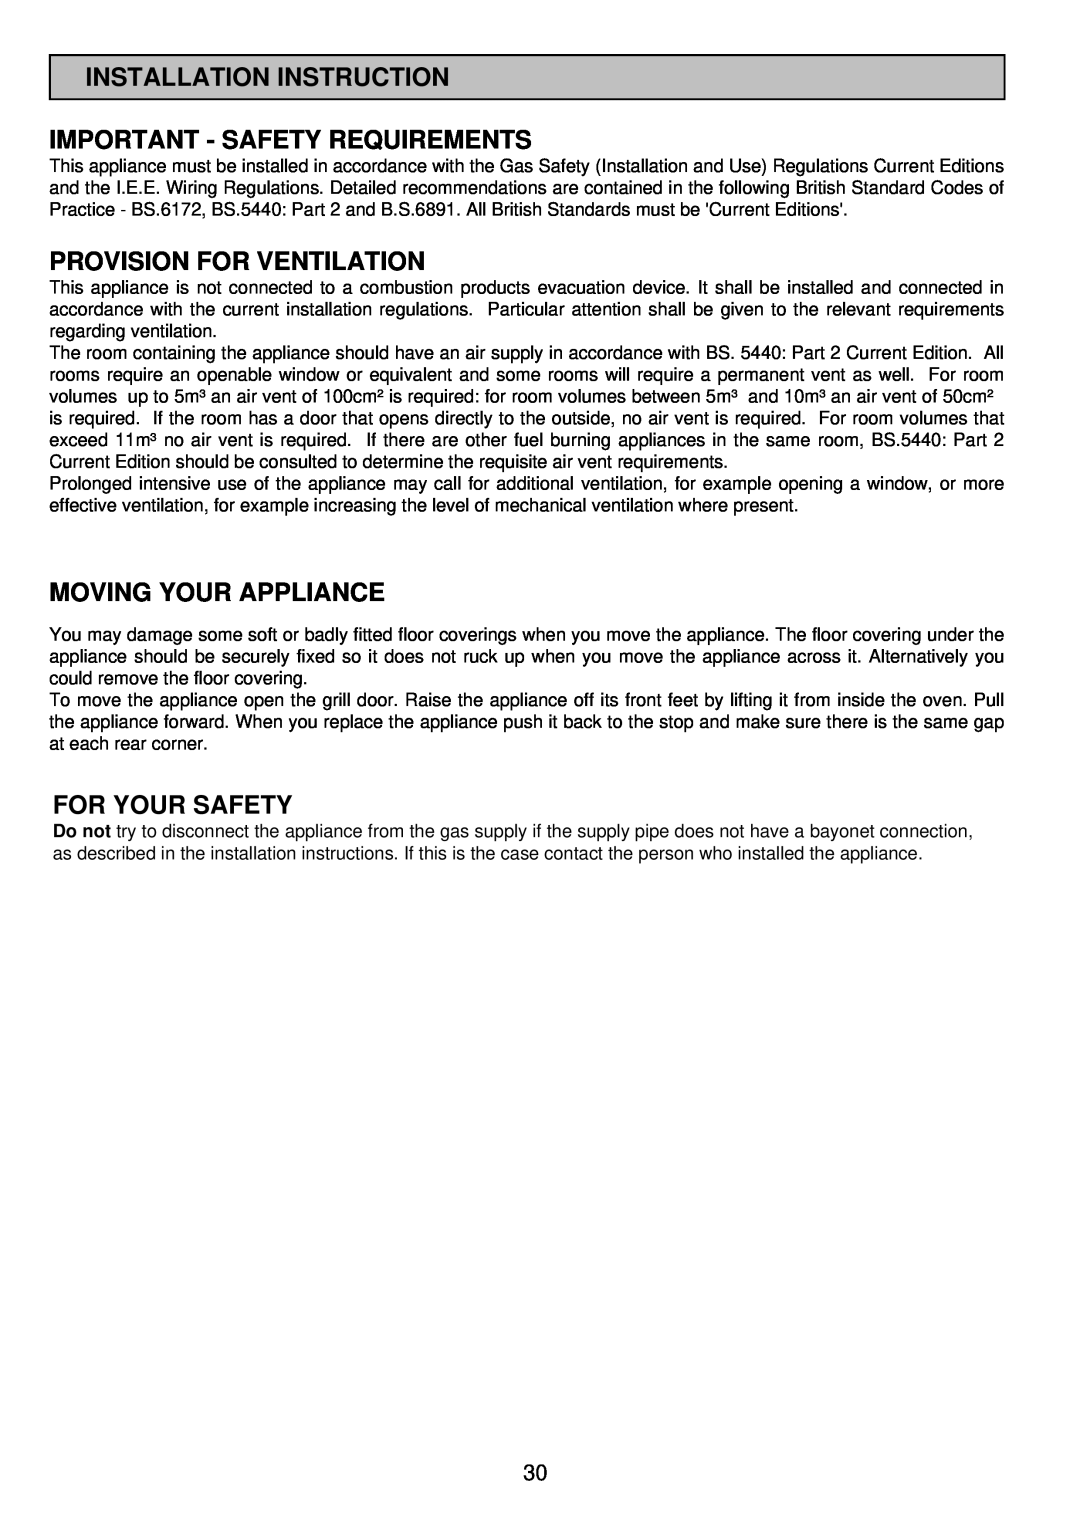 Electrolux SIM 533 Installation Instruction Important - Safety Requirements, Provision For Ventilation, For Your Safety 